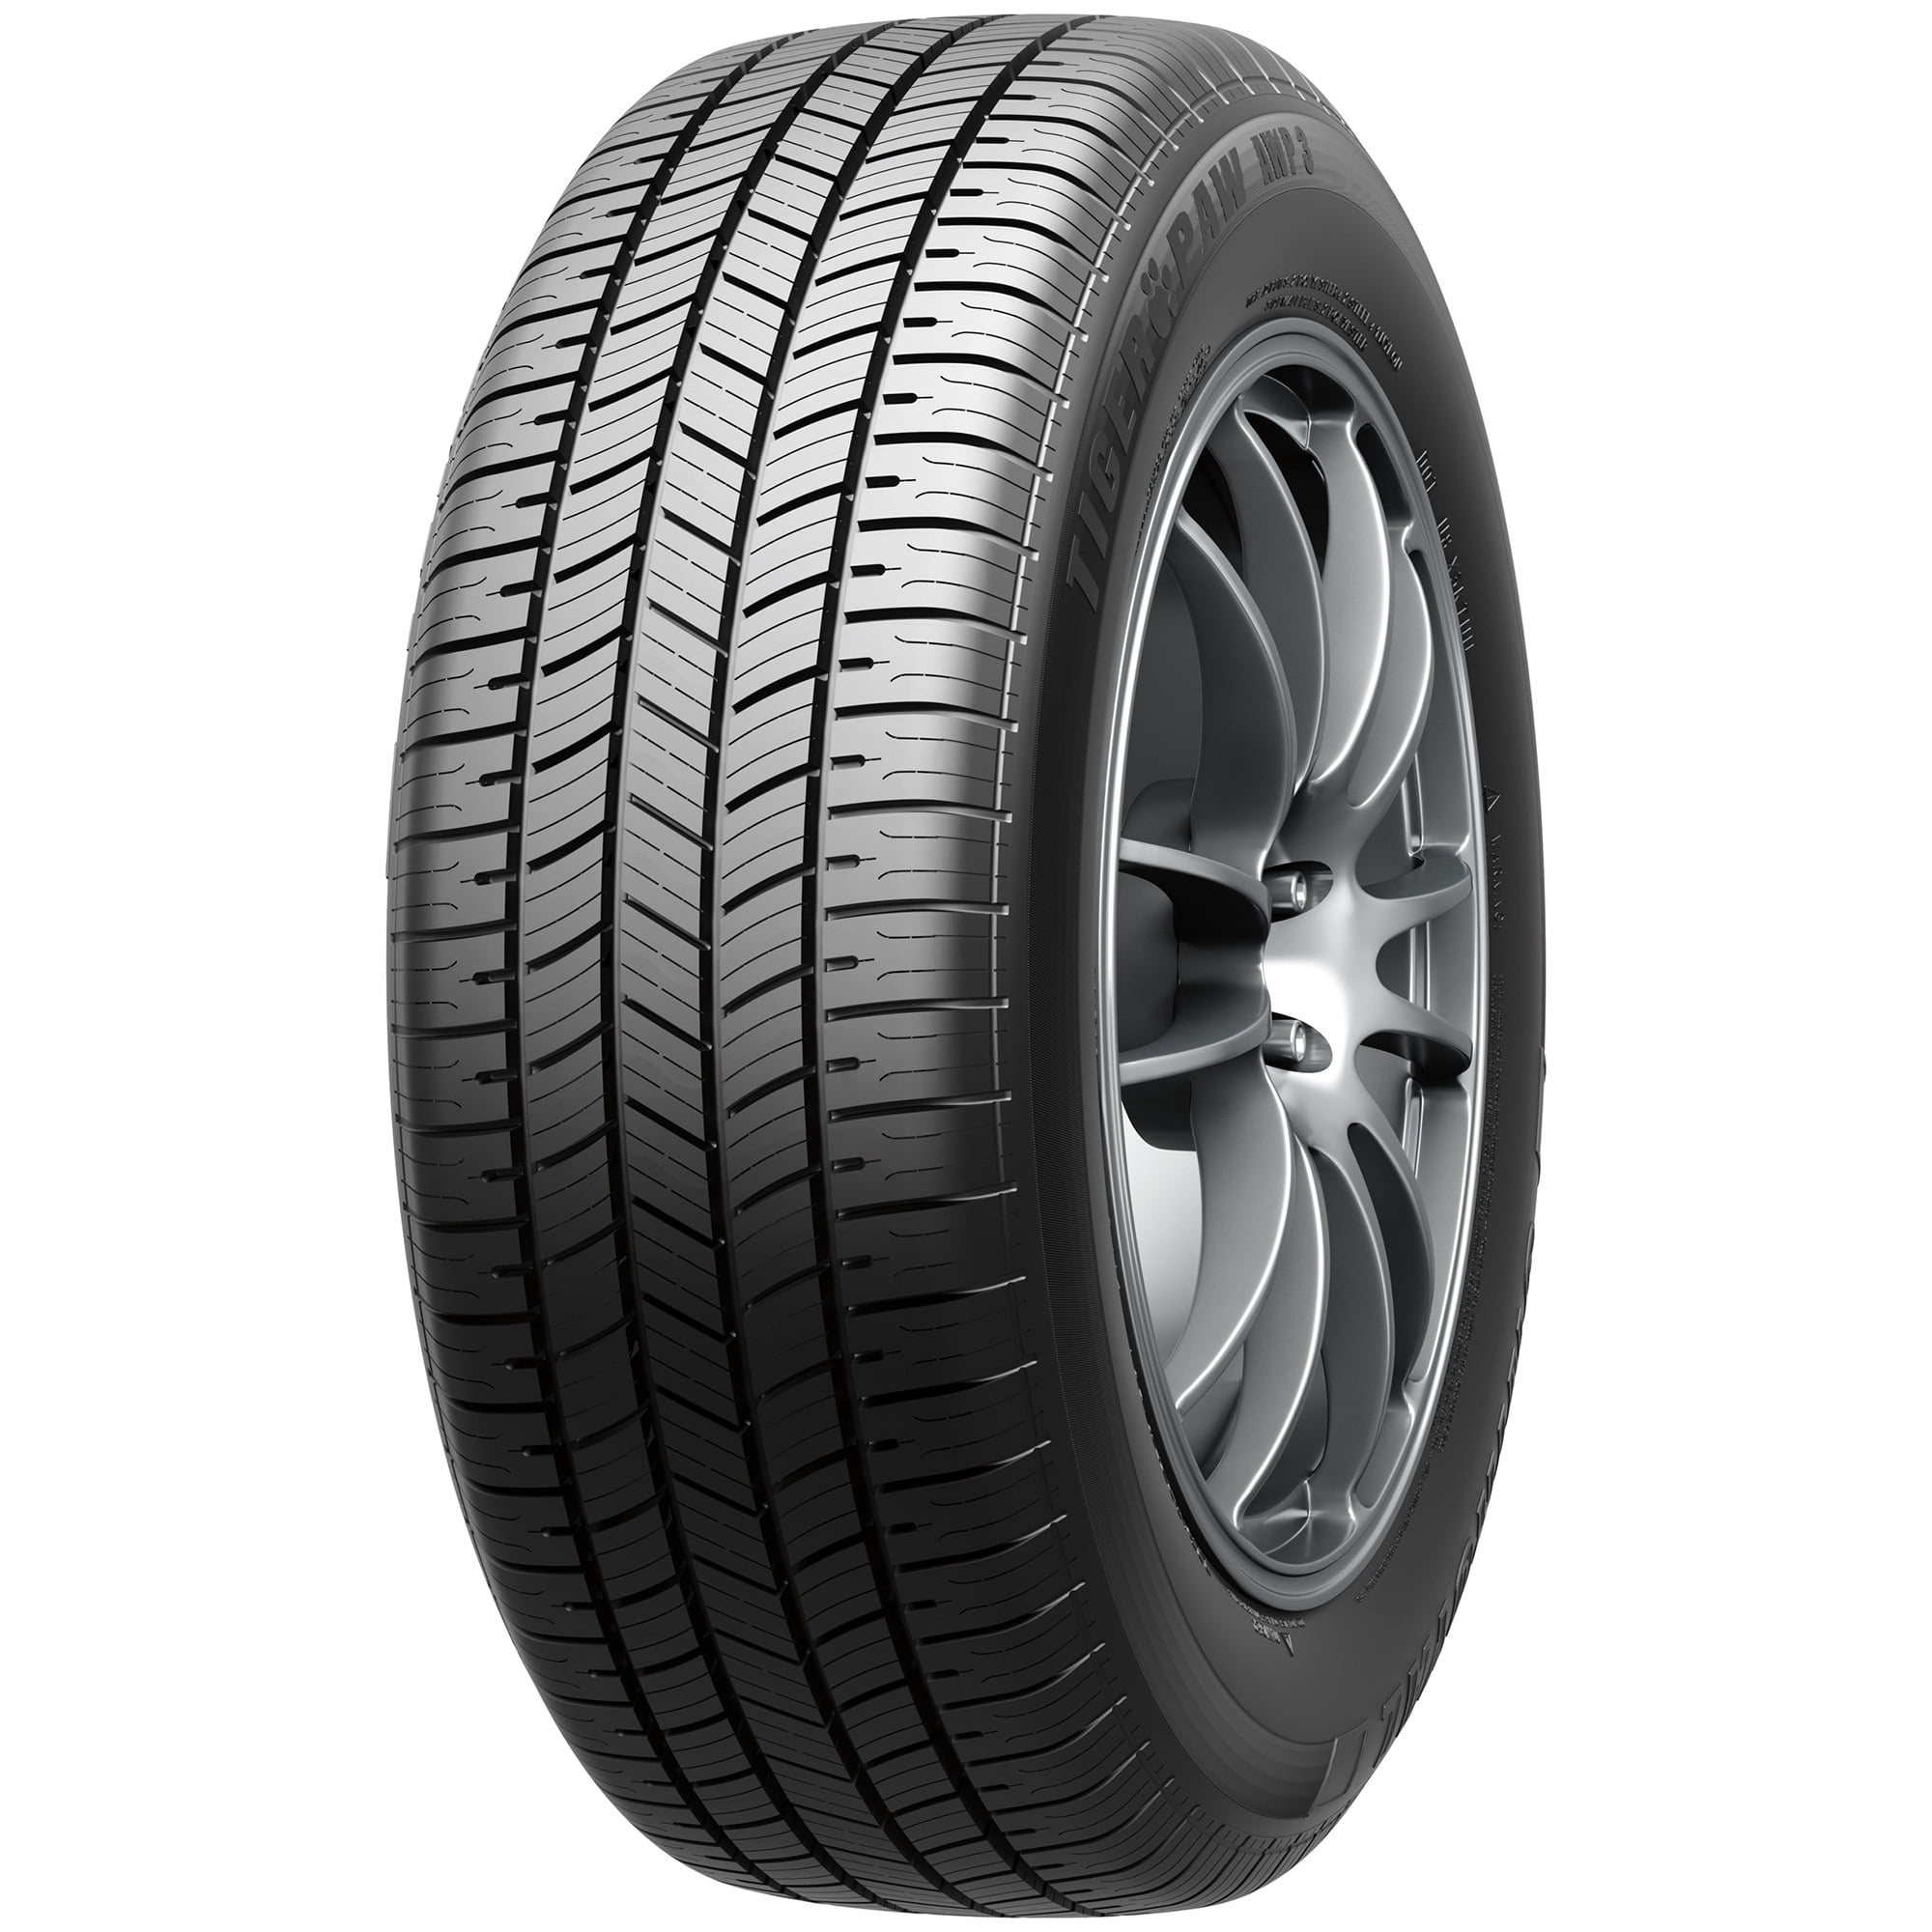 Uniroyal Tiger Paw Touring A/S All-Season Radial Tire-275/55R20 113H 